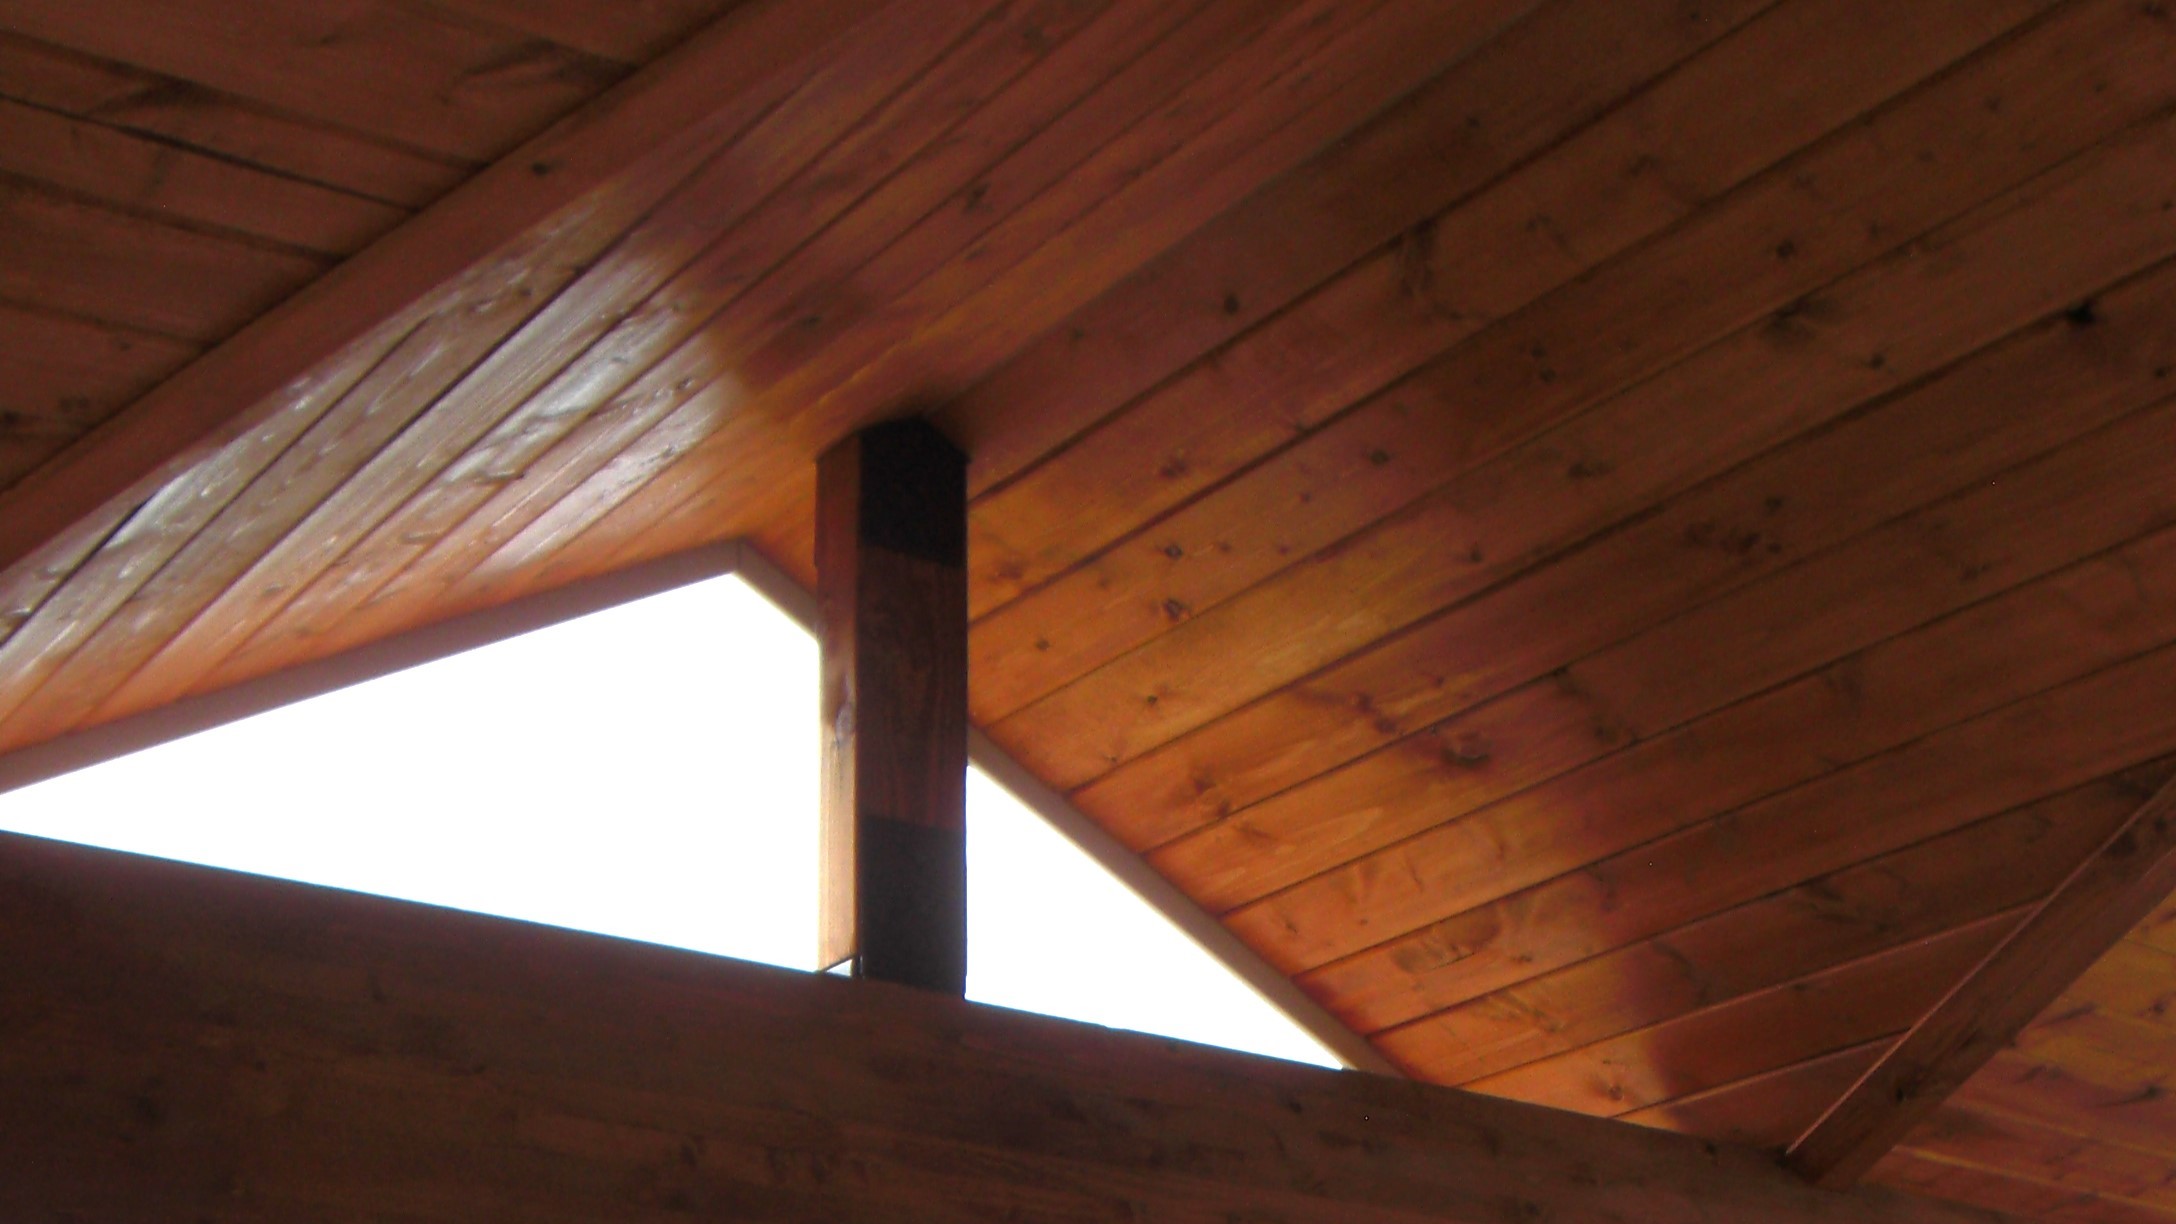 Peaked shed roof deck cover with a closed ceiling in tongue and groove knotty pine